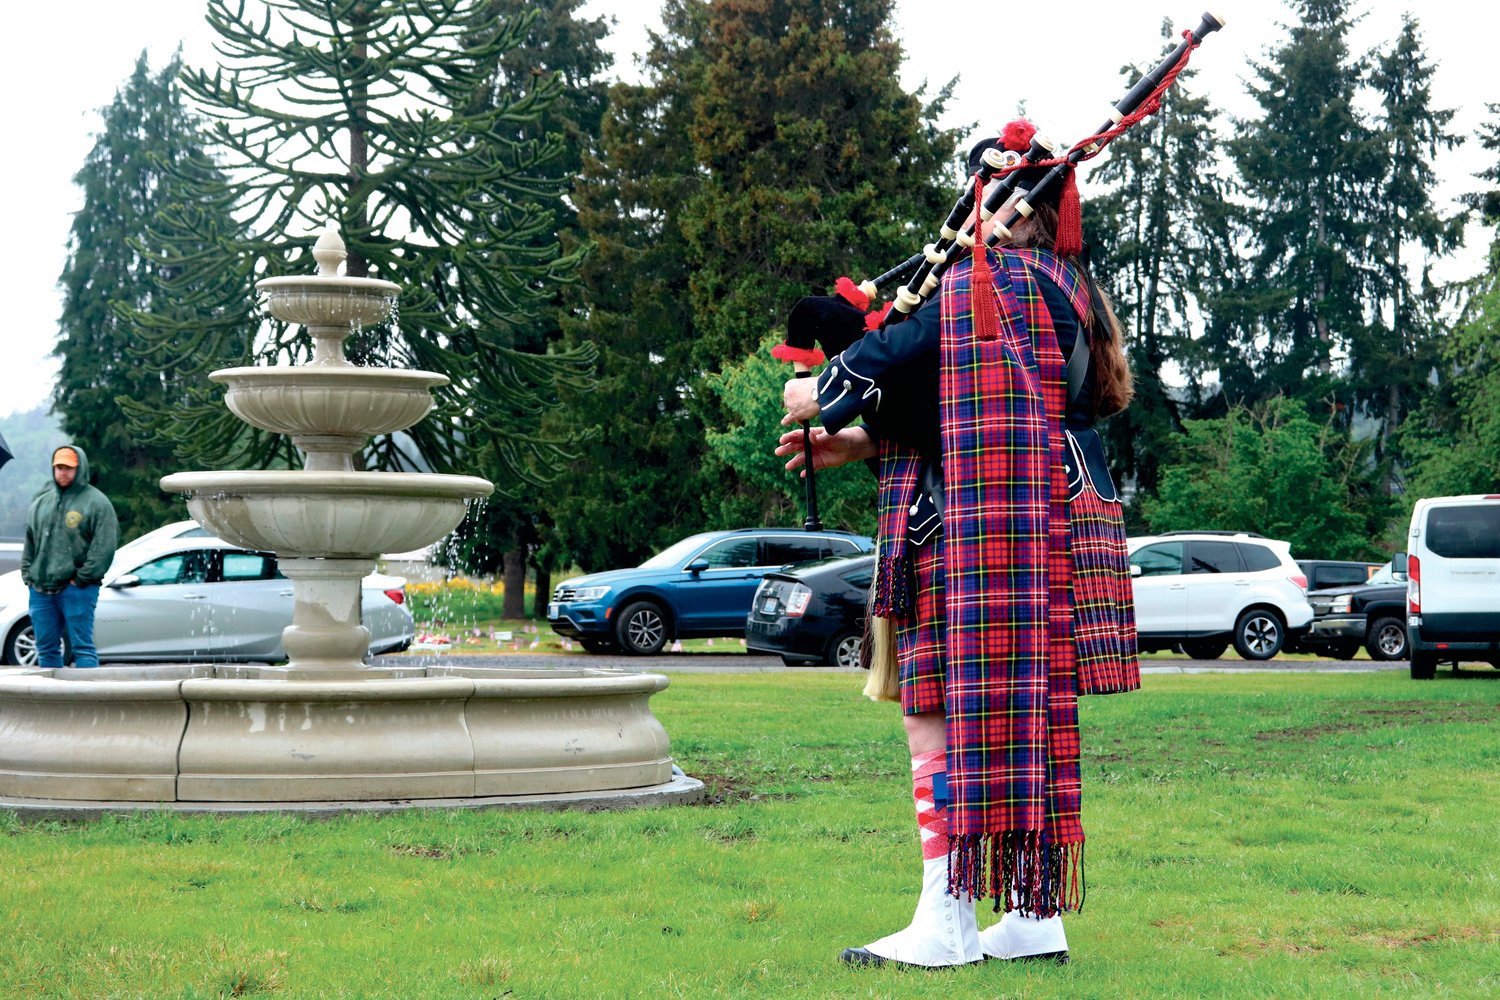 Bagpiper Beverly York plays “Amazing Grace” during the Sticklin Greenwood Memorial Park Rededication Ceremony in Centralia on Saturday.